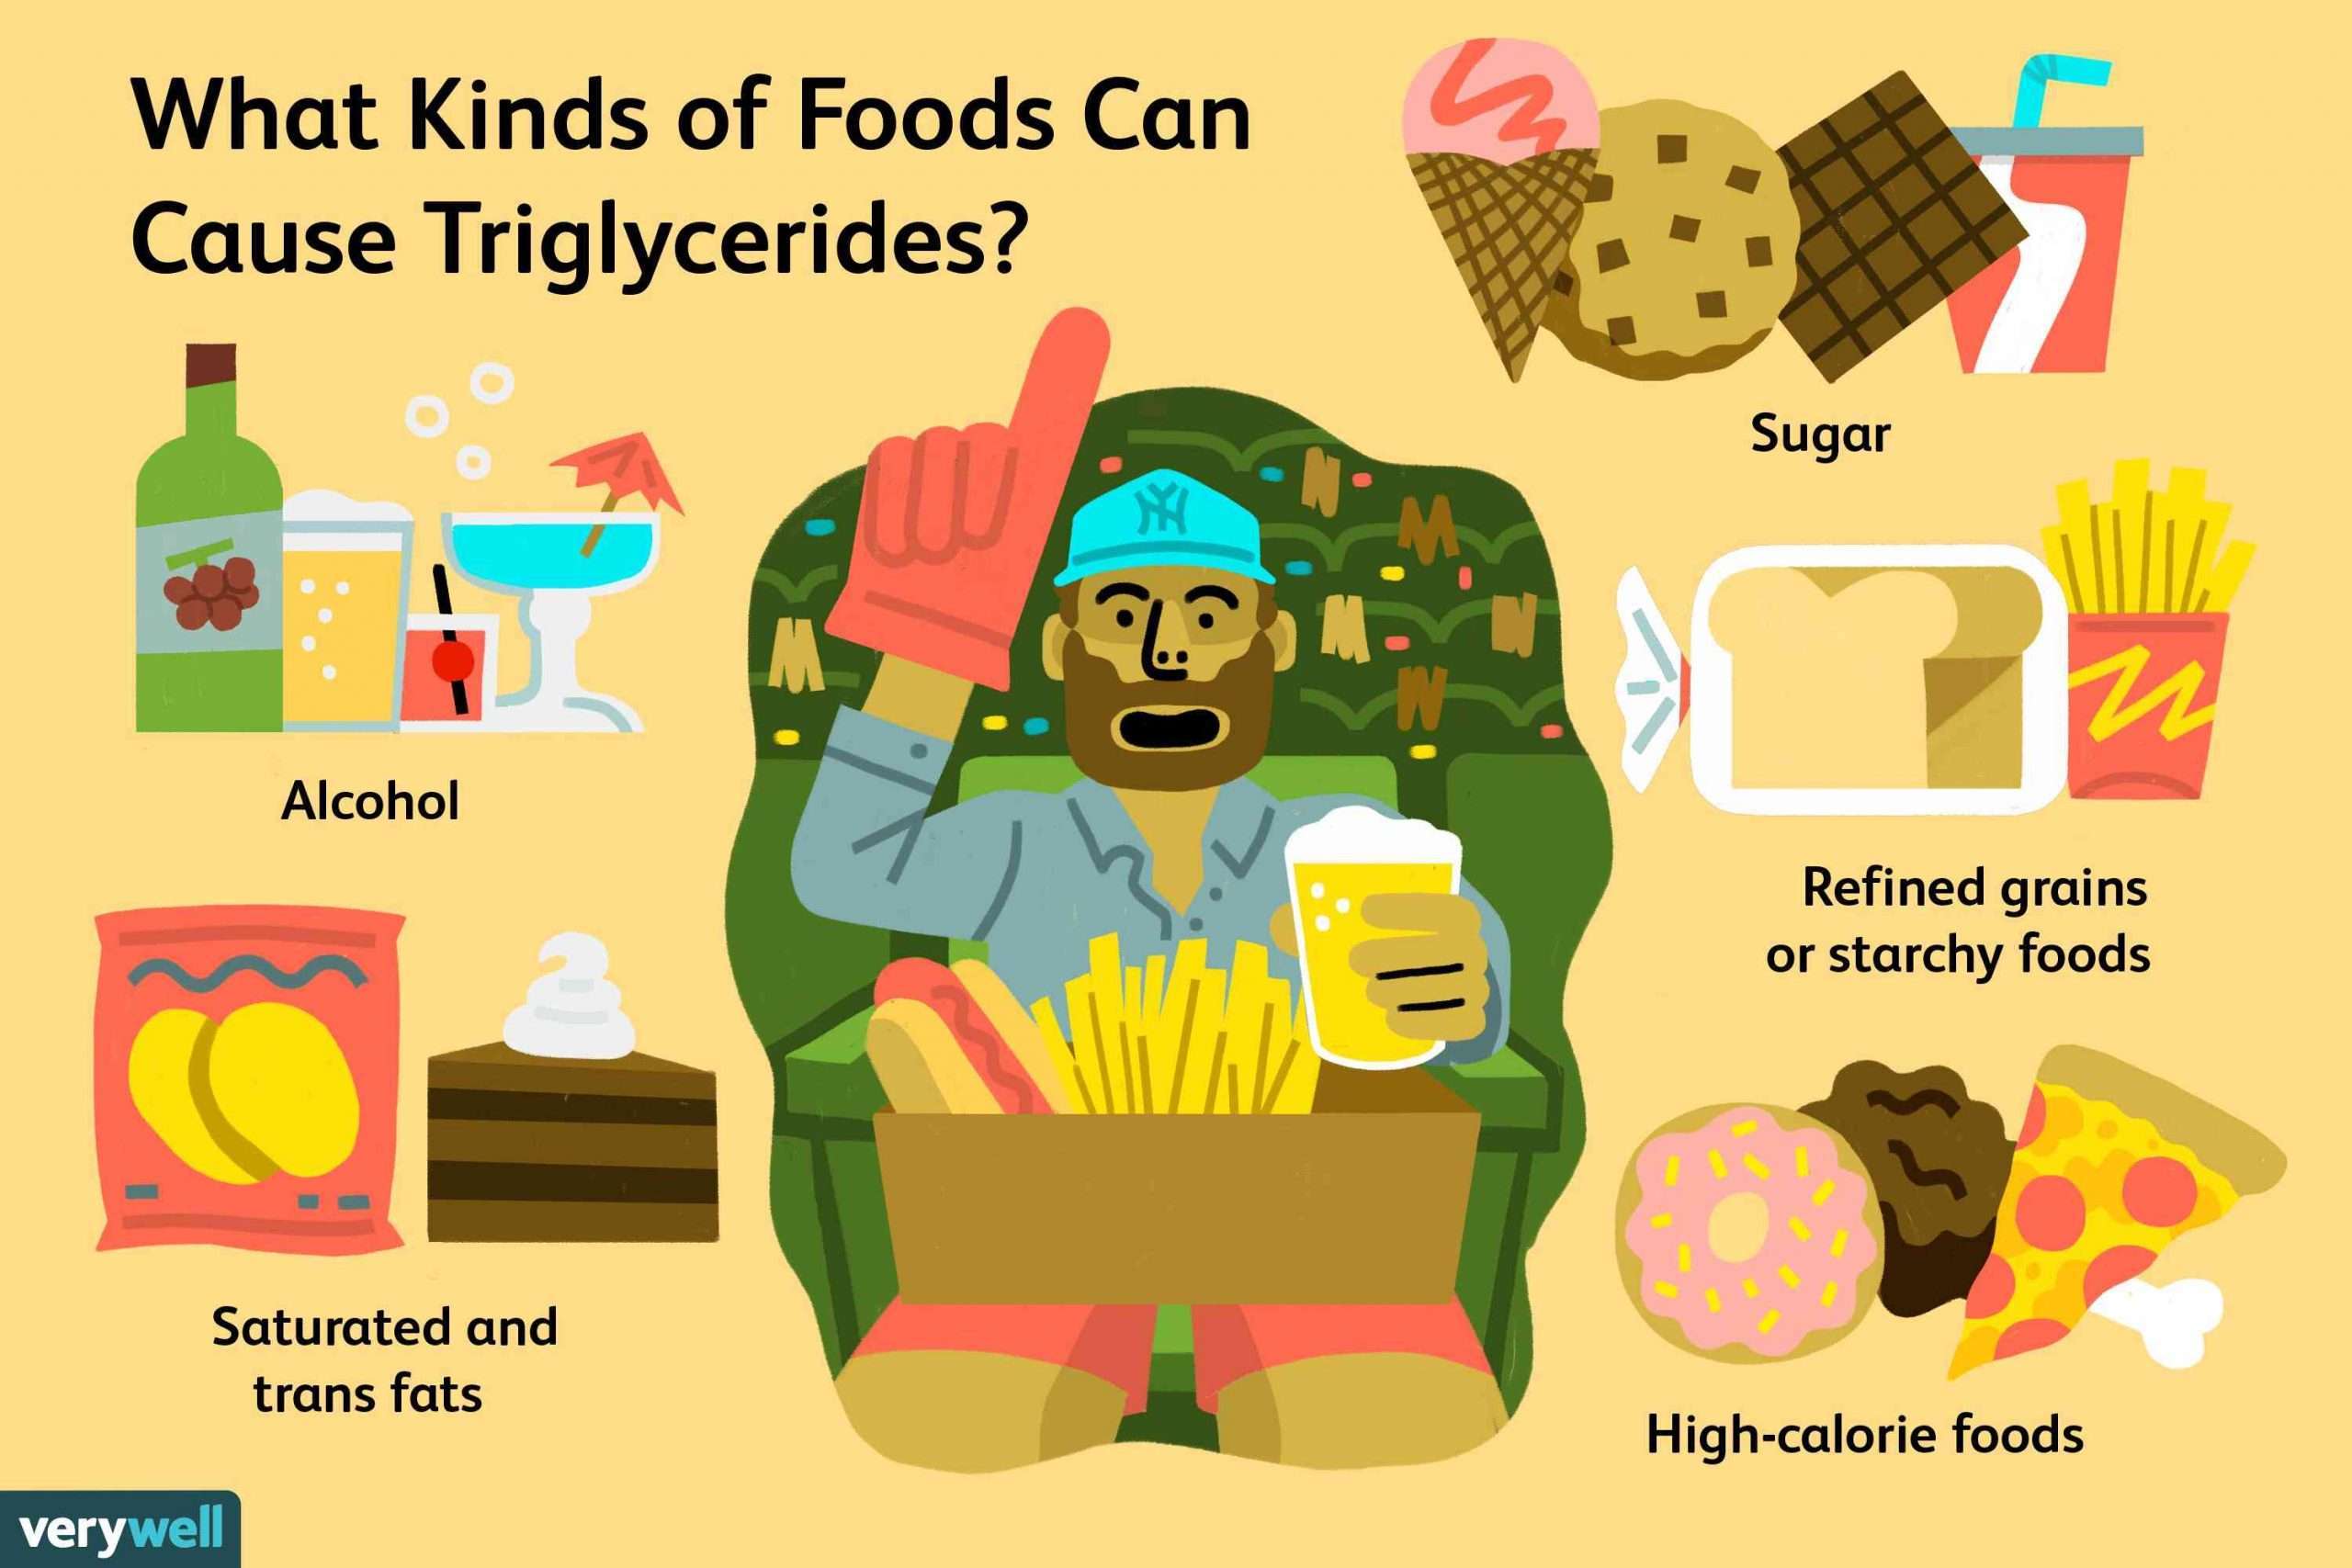 How To Increase Triglycerides